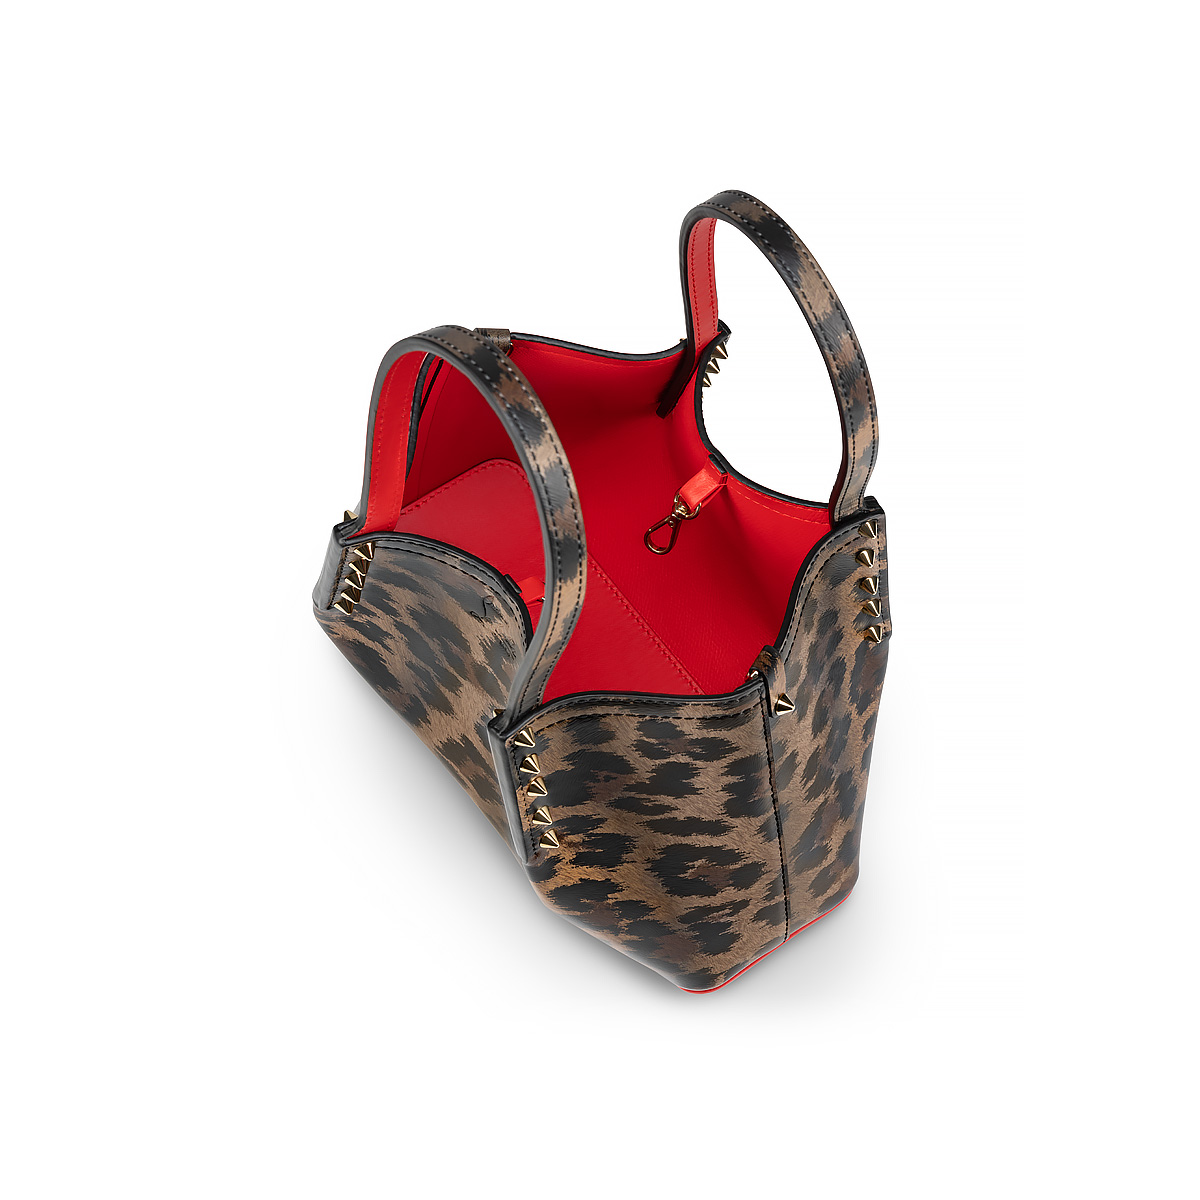 Cabarock mini - Tote bag - Tote bag - Leopard embossed calf leather Pony  Kitty - Brown - Christian Louboutin